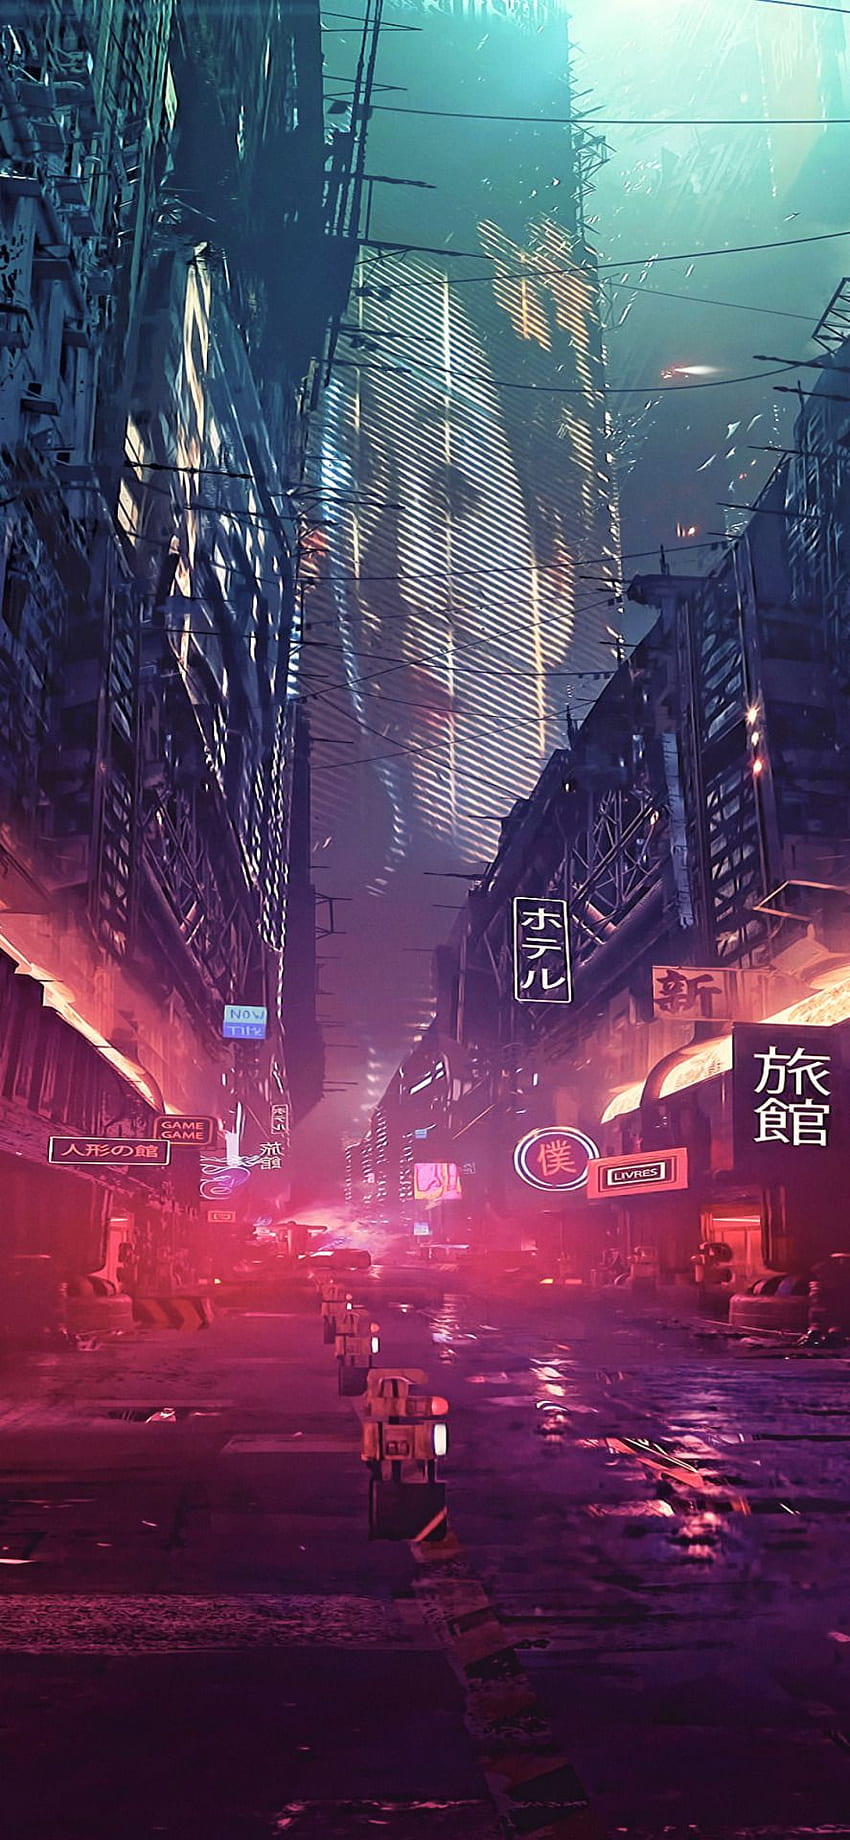 Blade Runner 2049 Phone Wallpaper by Paul Chadeisson  Mobile Abyss